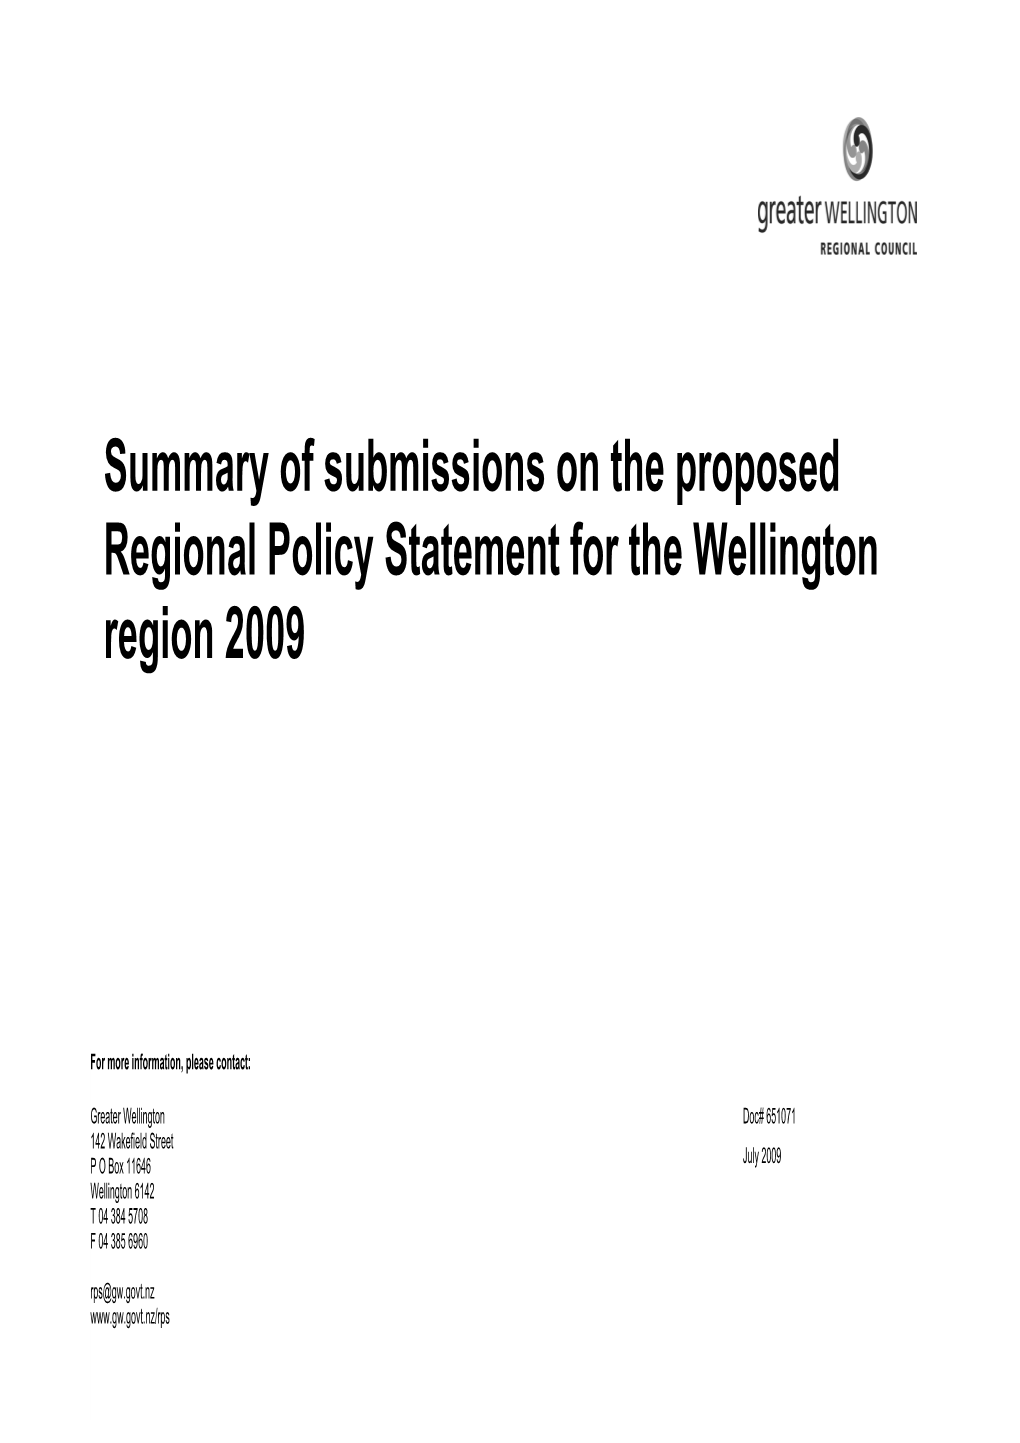 Summary of Submissions on the Proposed Regional Policy Statement for the Wellington Region 2009